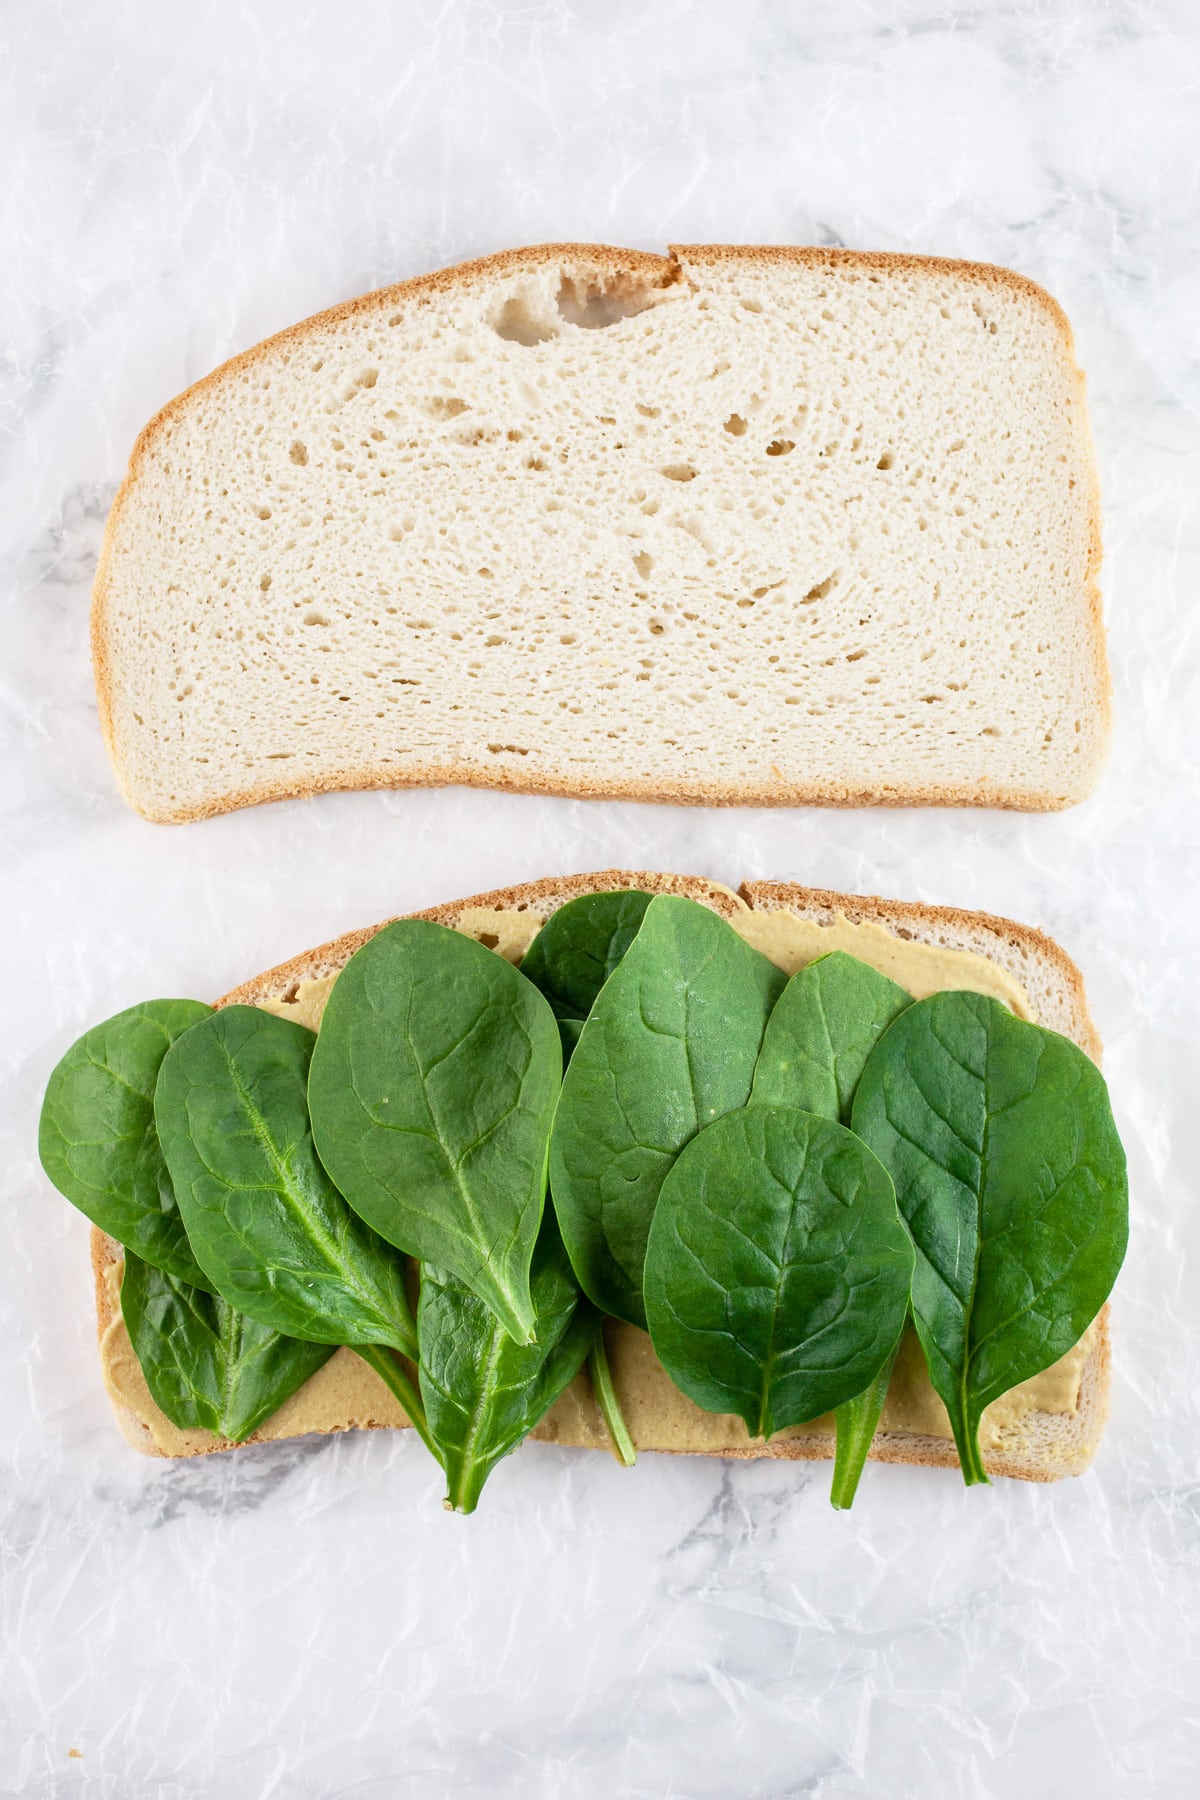 Sliced bread with mustard and fresh spinach.